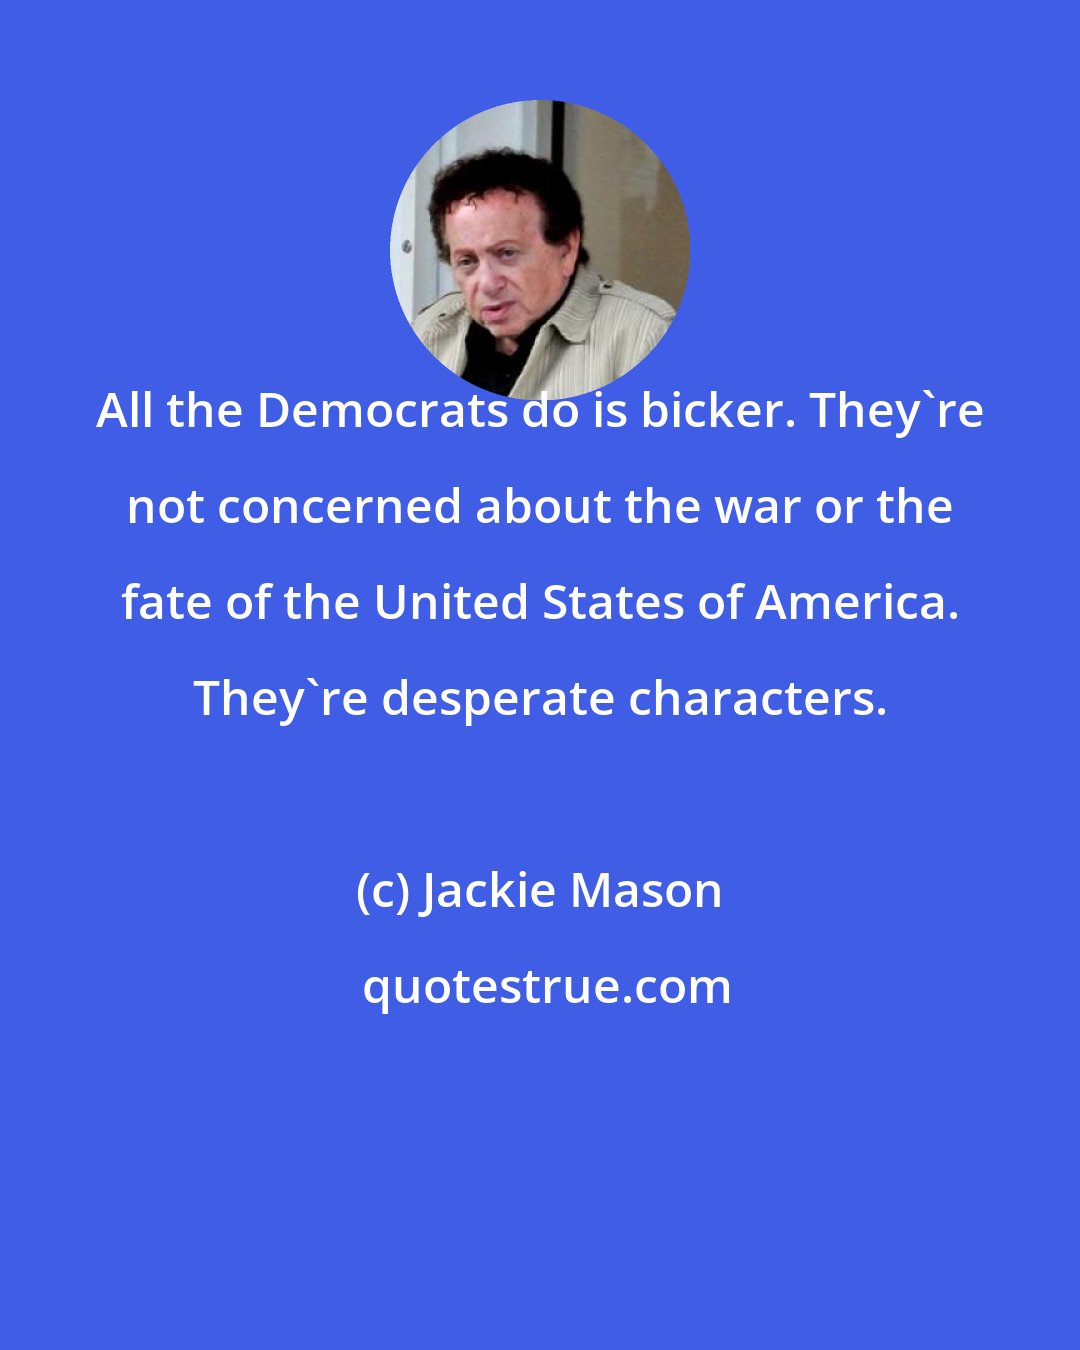 Jackie Mason: All the Democrats do is bicker. They're not concerned about the war or the fate of the United States of America. They're desperate characters.